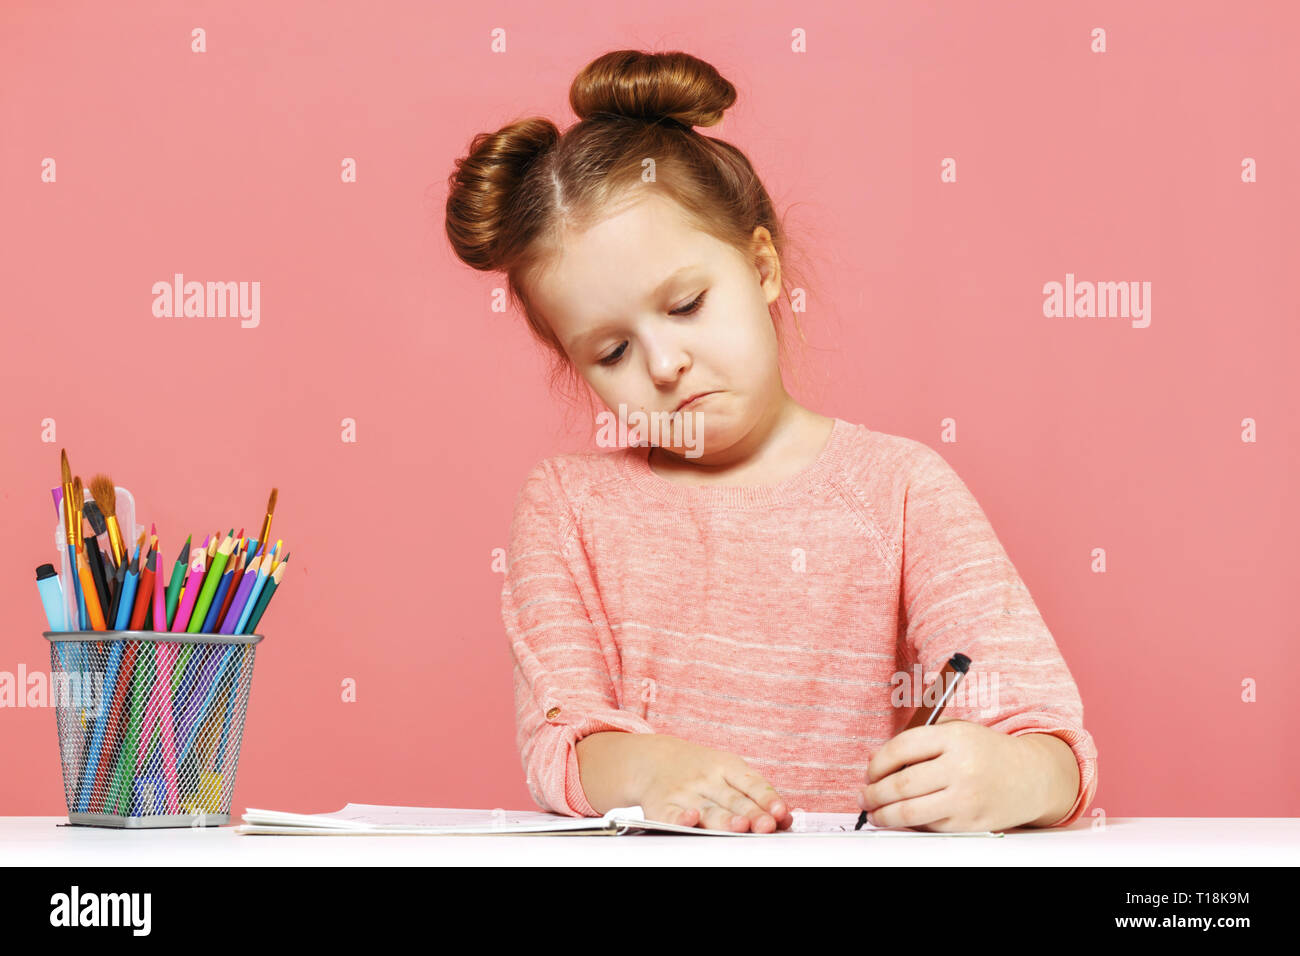 A cute little baby girl is sitting at the table and drawing with enthusiasm. Pink Background Close-Up Stock Photo